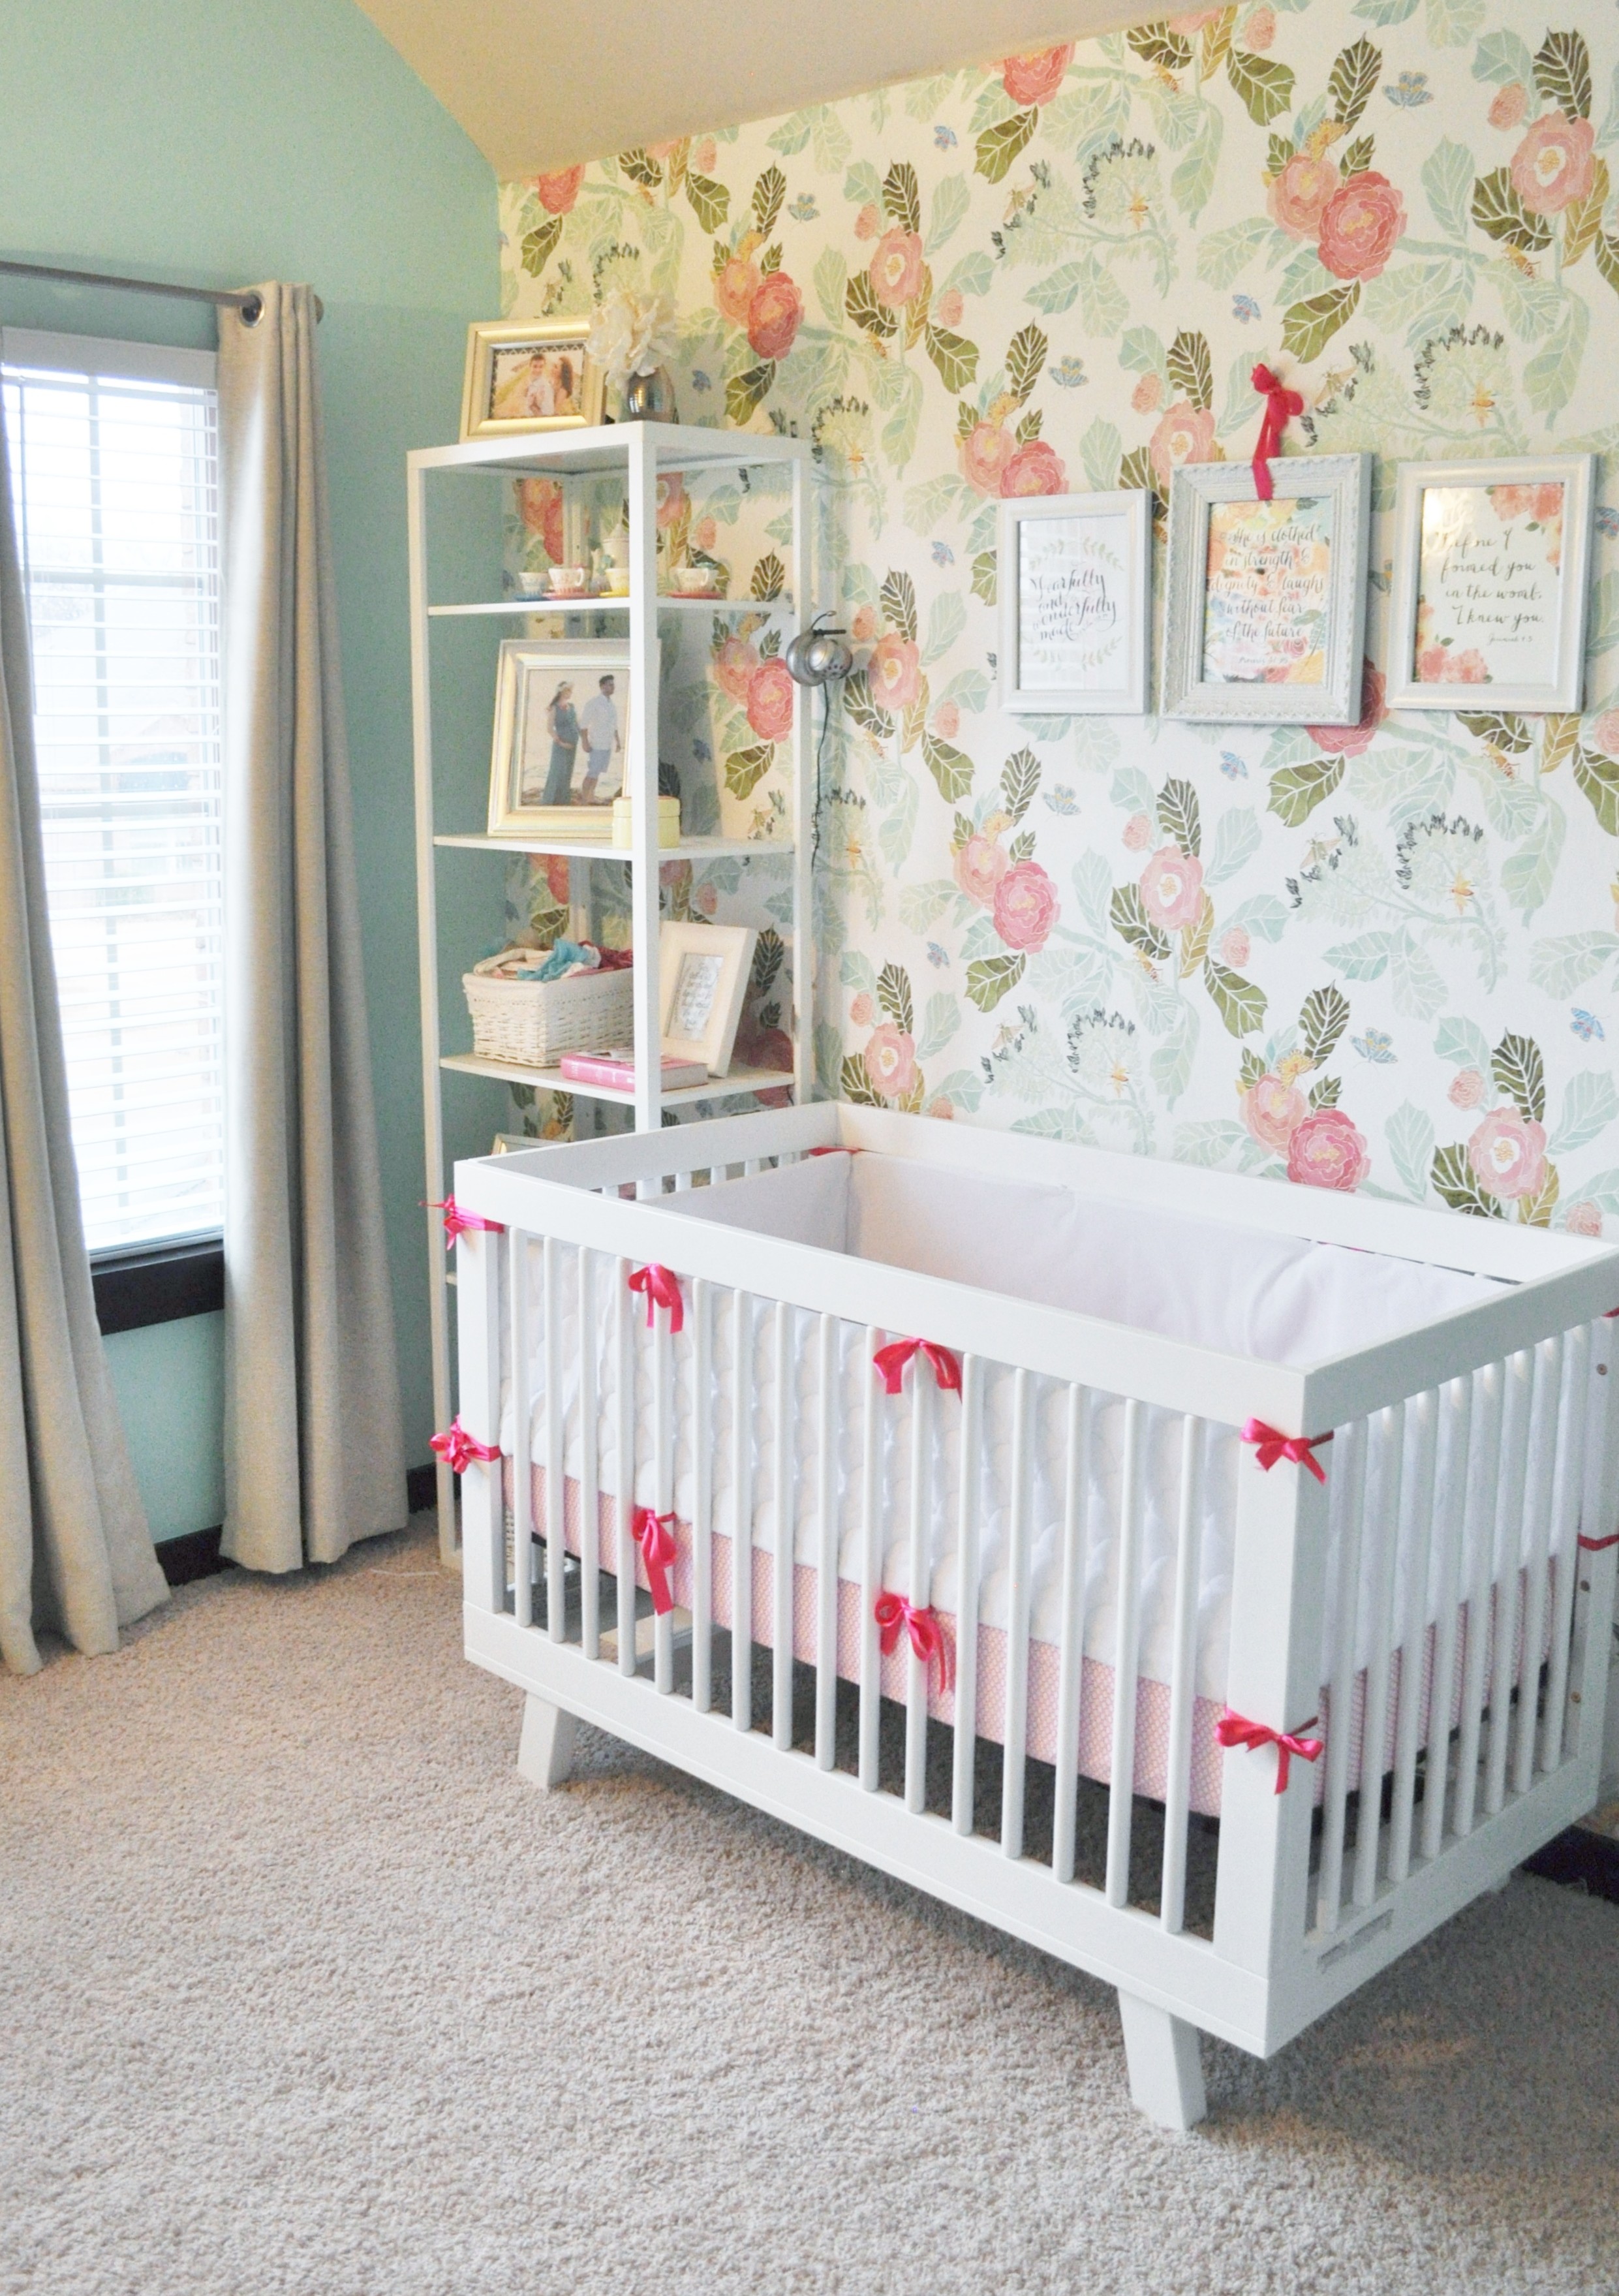 Contemporary White Crib in this Floral Pink Peony and Mint Nursery